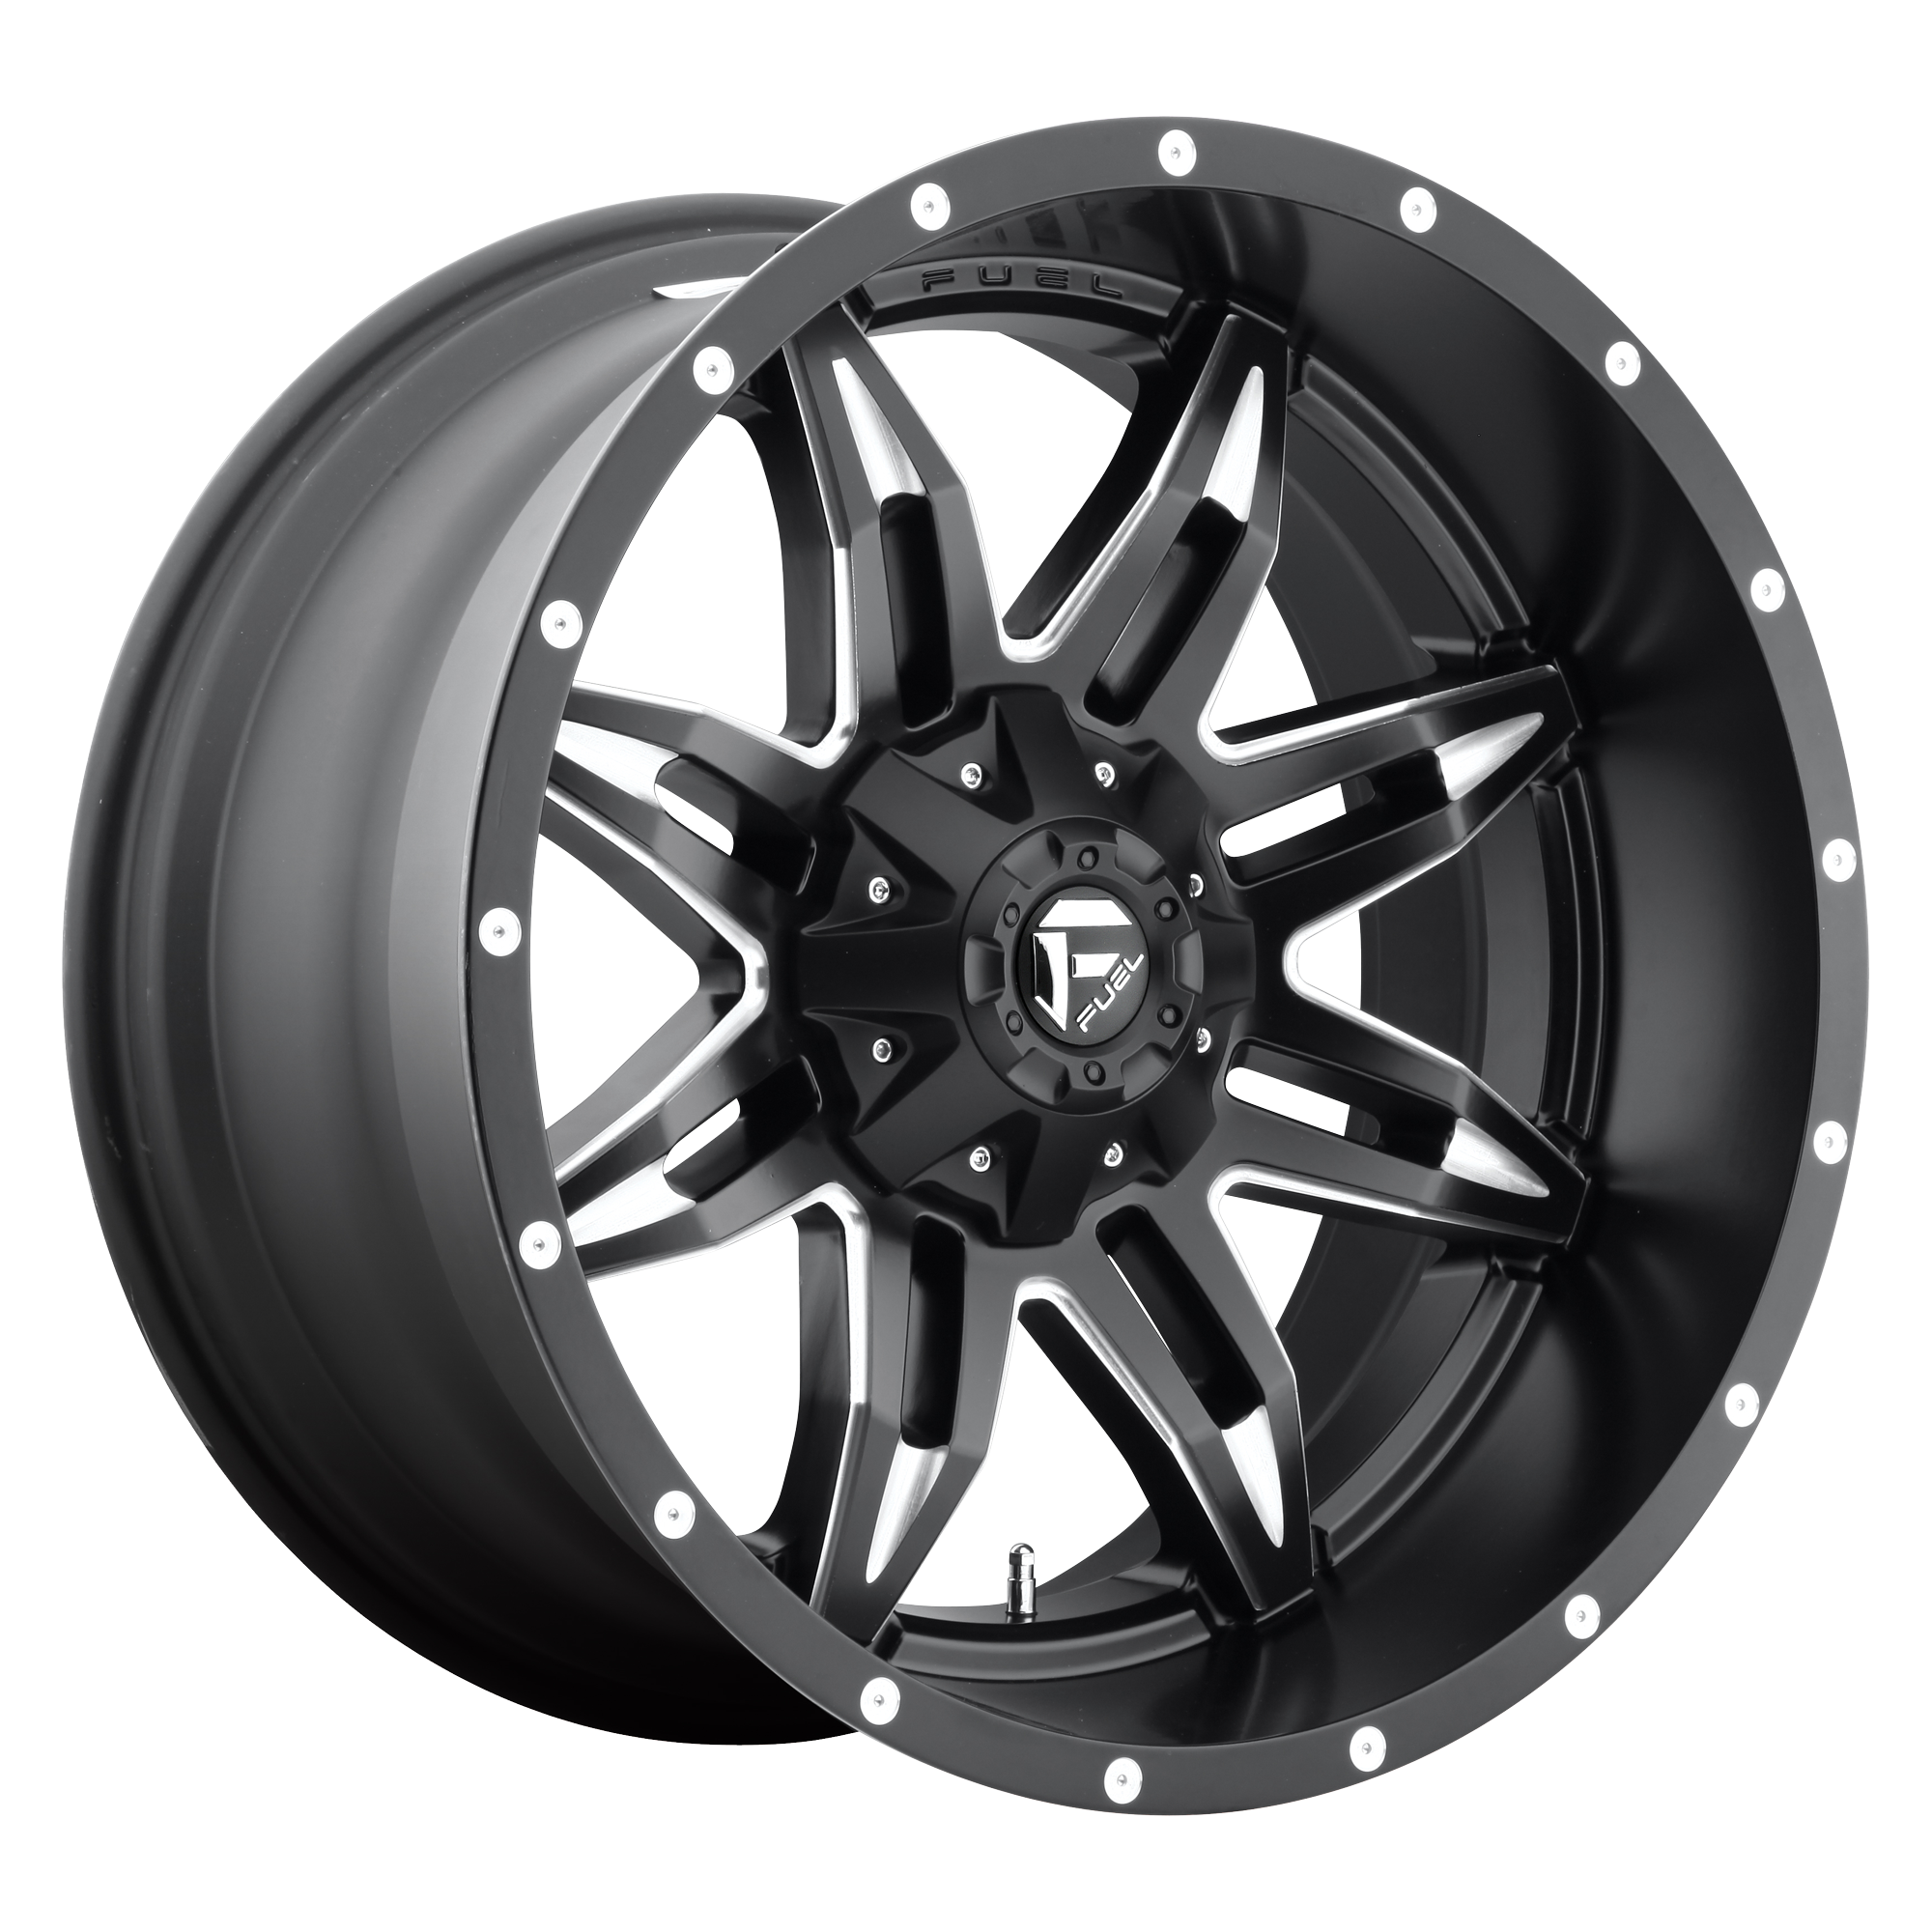 LETHAL 20x10 5x114.30/5x127.00 MATTE BLACK MILLED (-12 mm) - Tires and Engine Performance